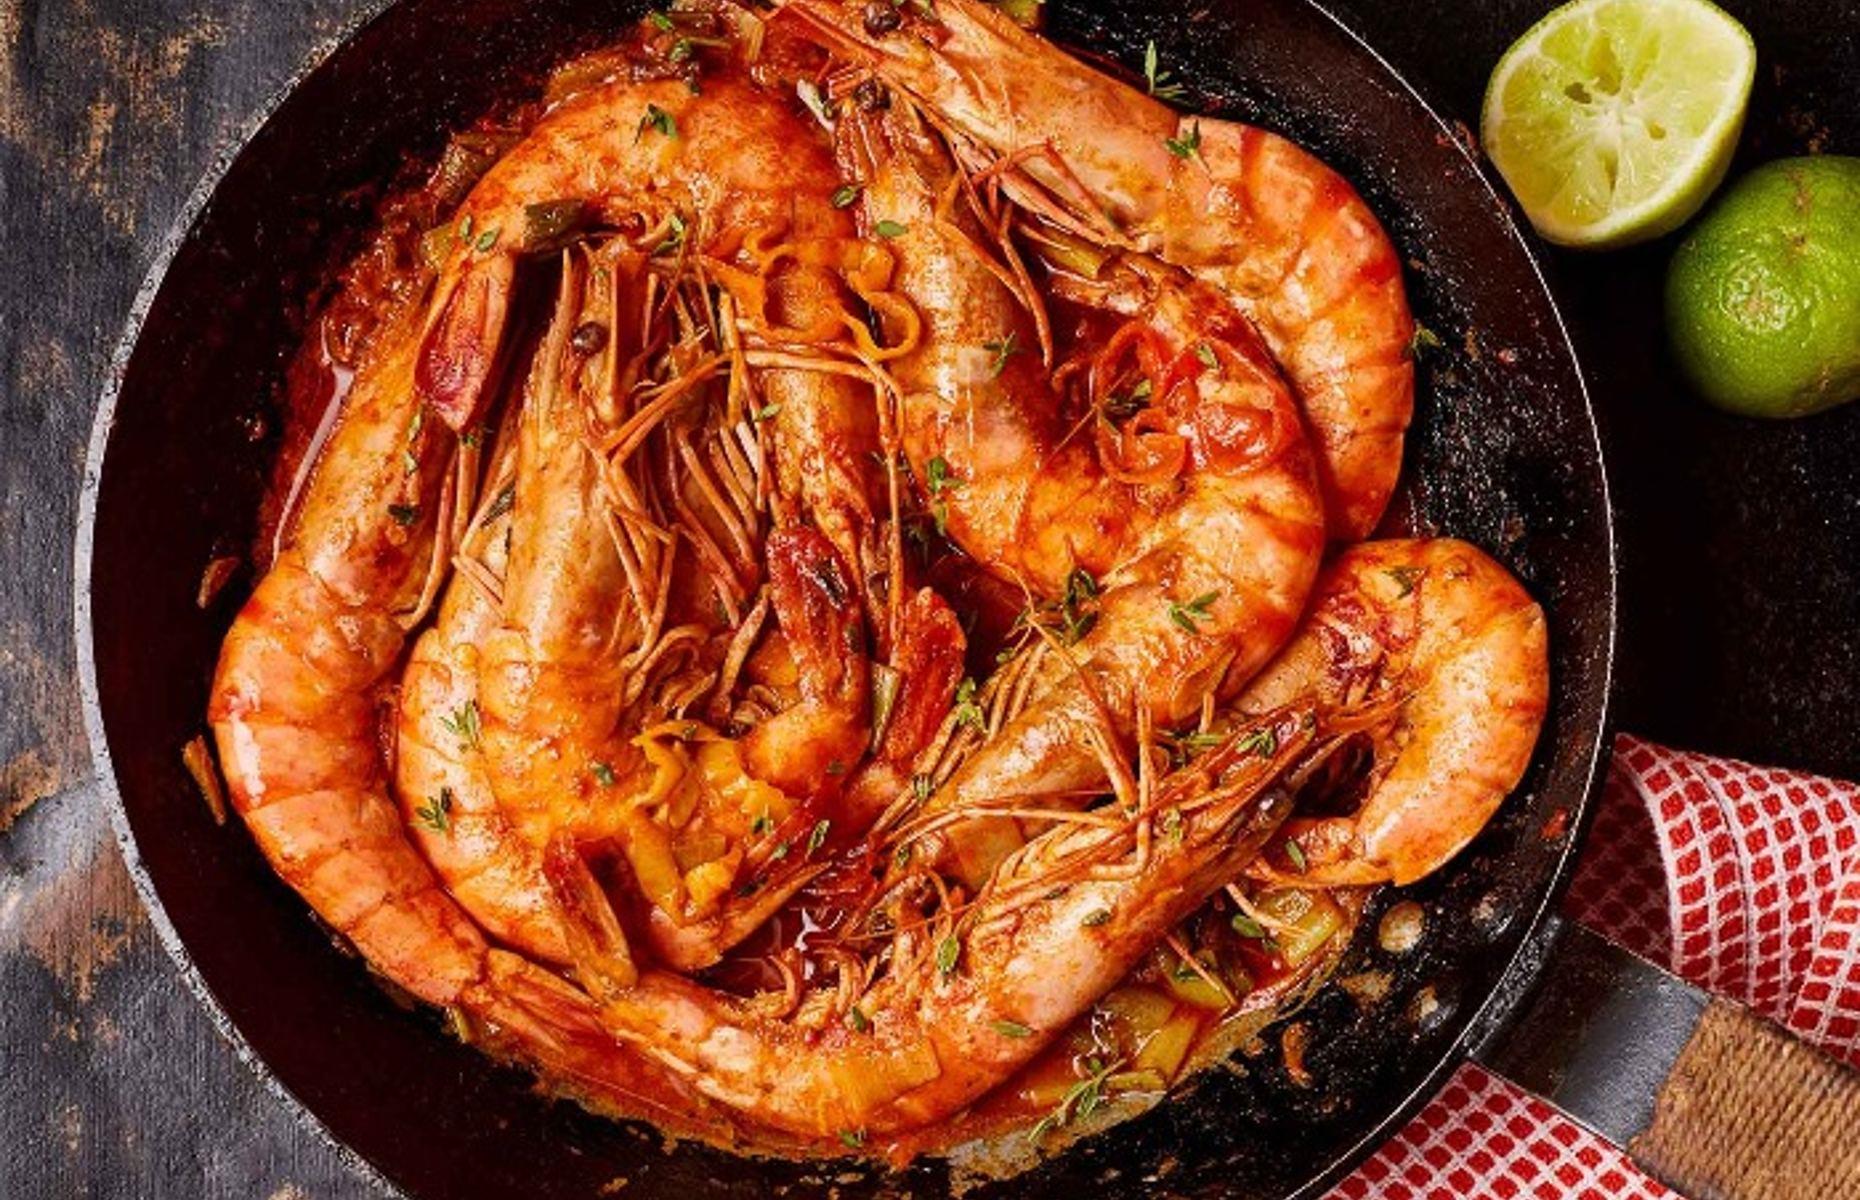 Our tastiest prawn recipes to try tonight